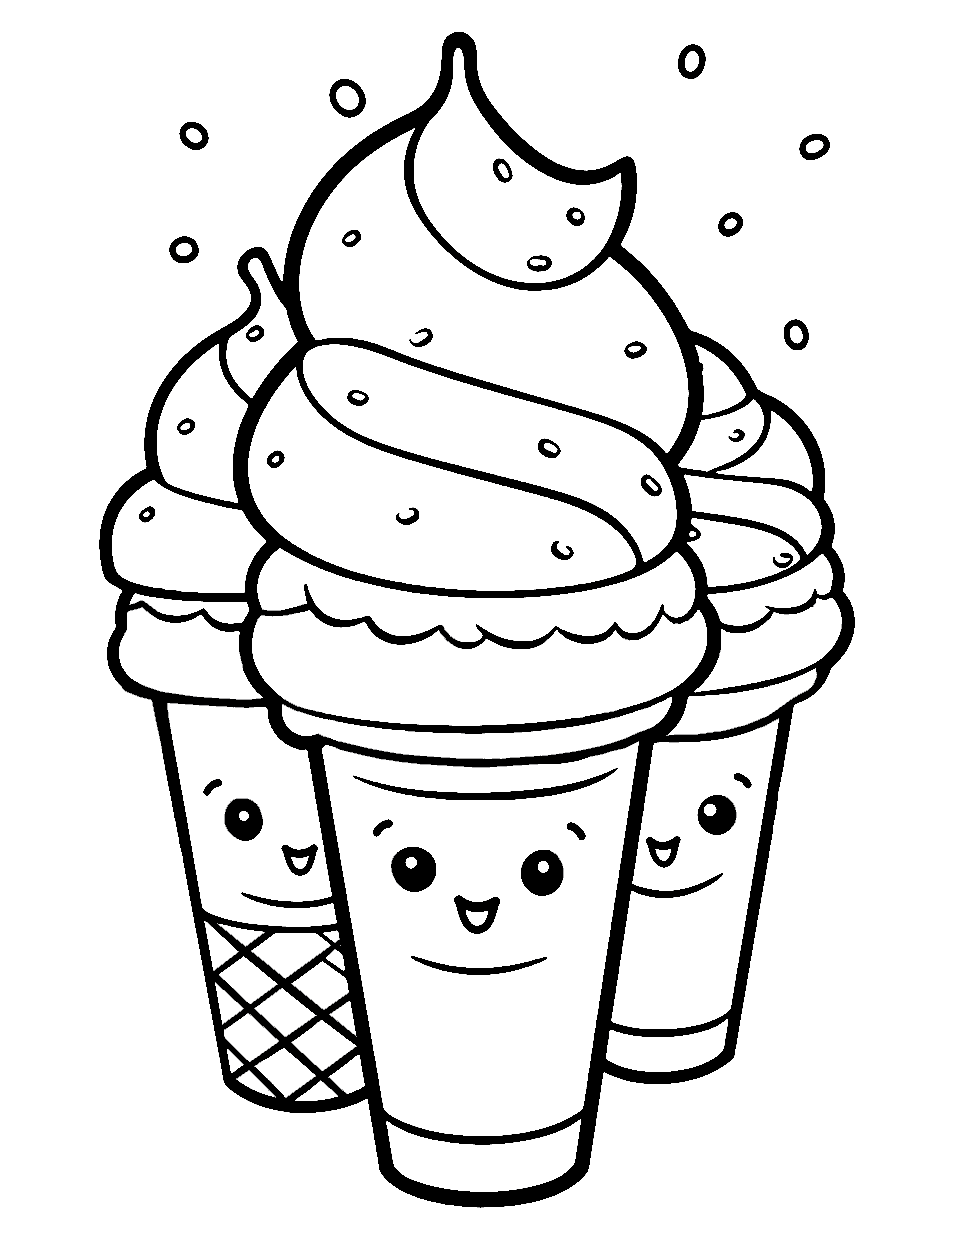 Ice Cream Cone Trio Coloring Page - Three ice cream cones sitting side by side with smiley faces.